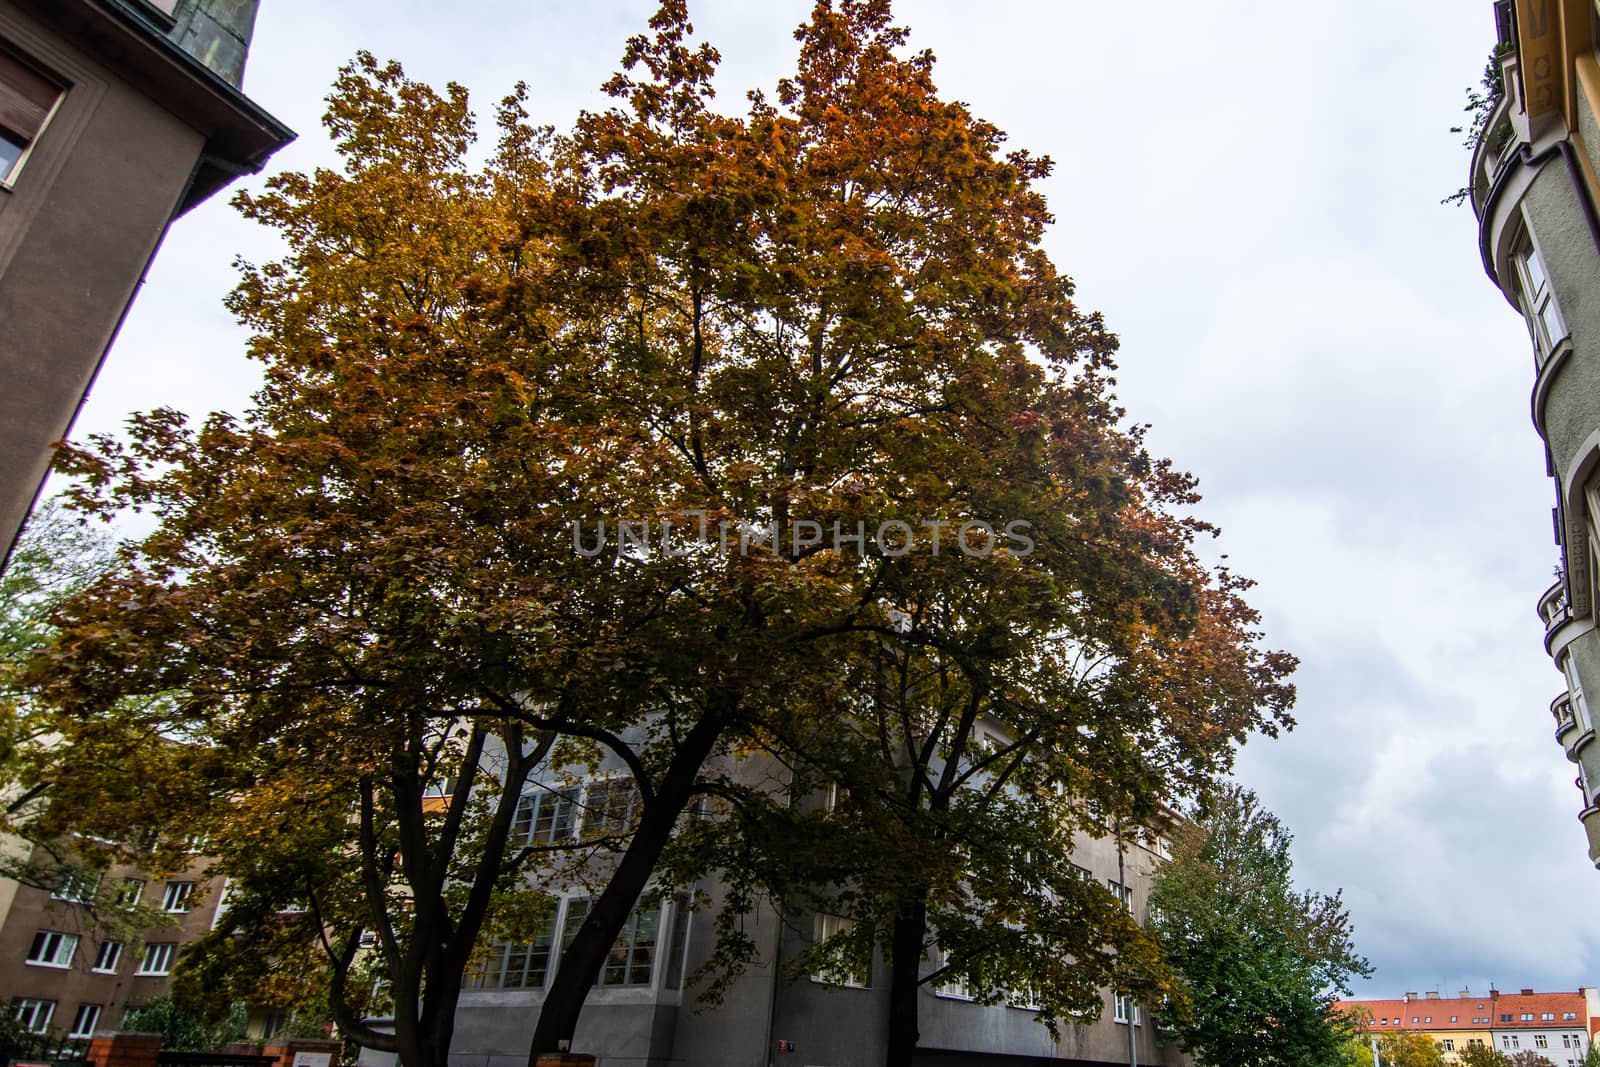 The foliage of a tree in the city on a stormy autumn day by gonzalobell